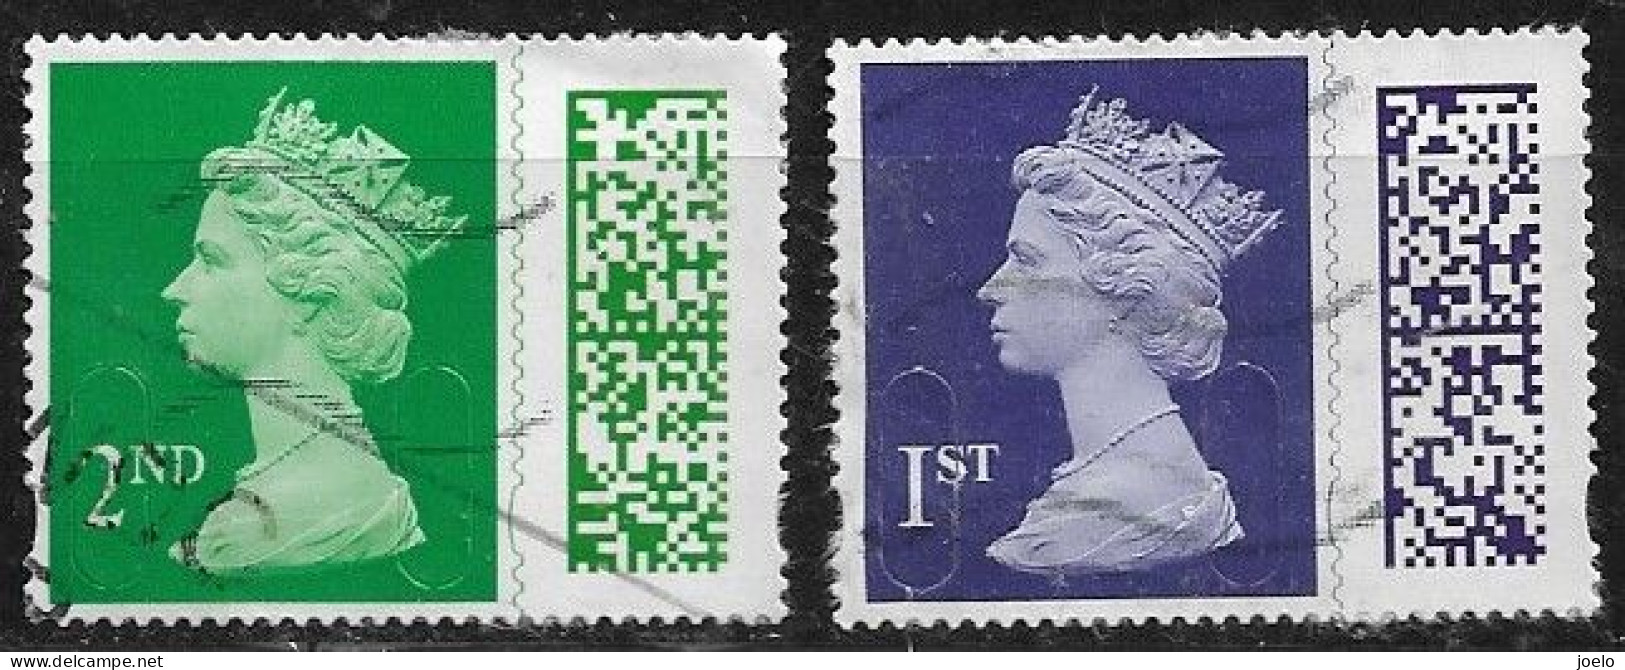 GB 2022 MACHIN NEW BARCODE 2nd CLASS GREEN AND 1ST CLASS PURPLE PAIR - Used Stamps